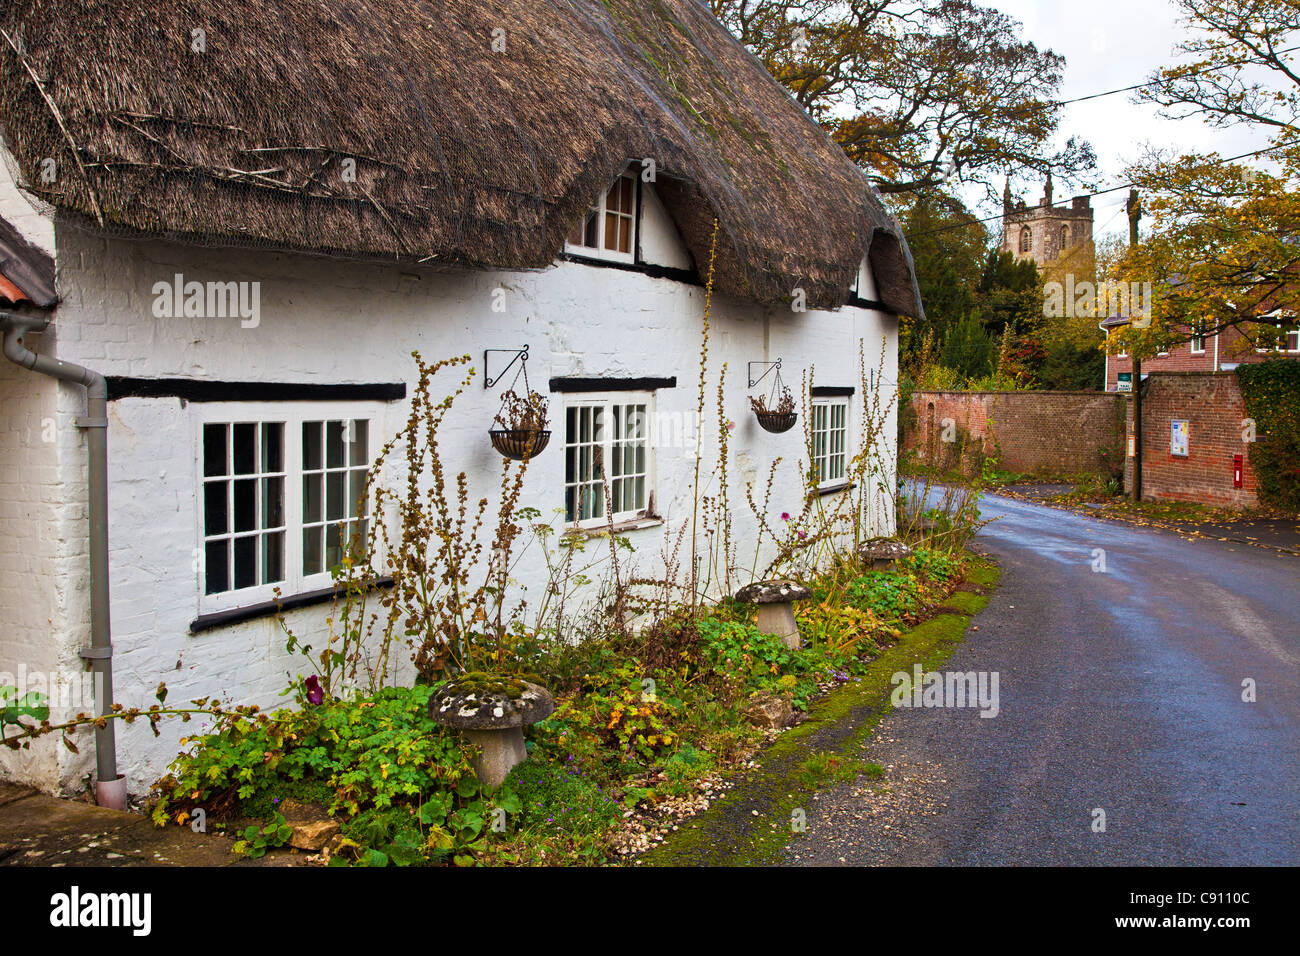 Typical English Country Village Road With A Thatched Cottage And